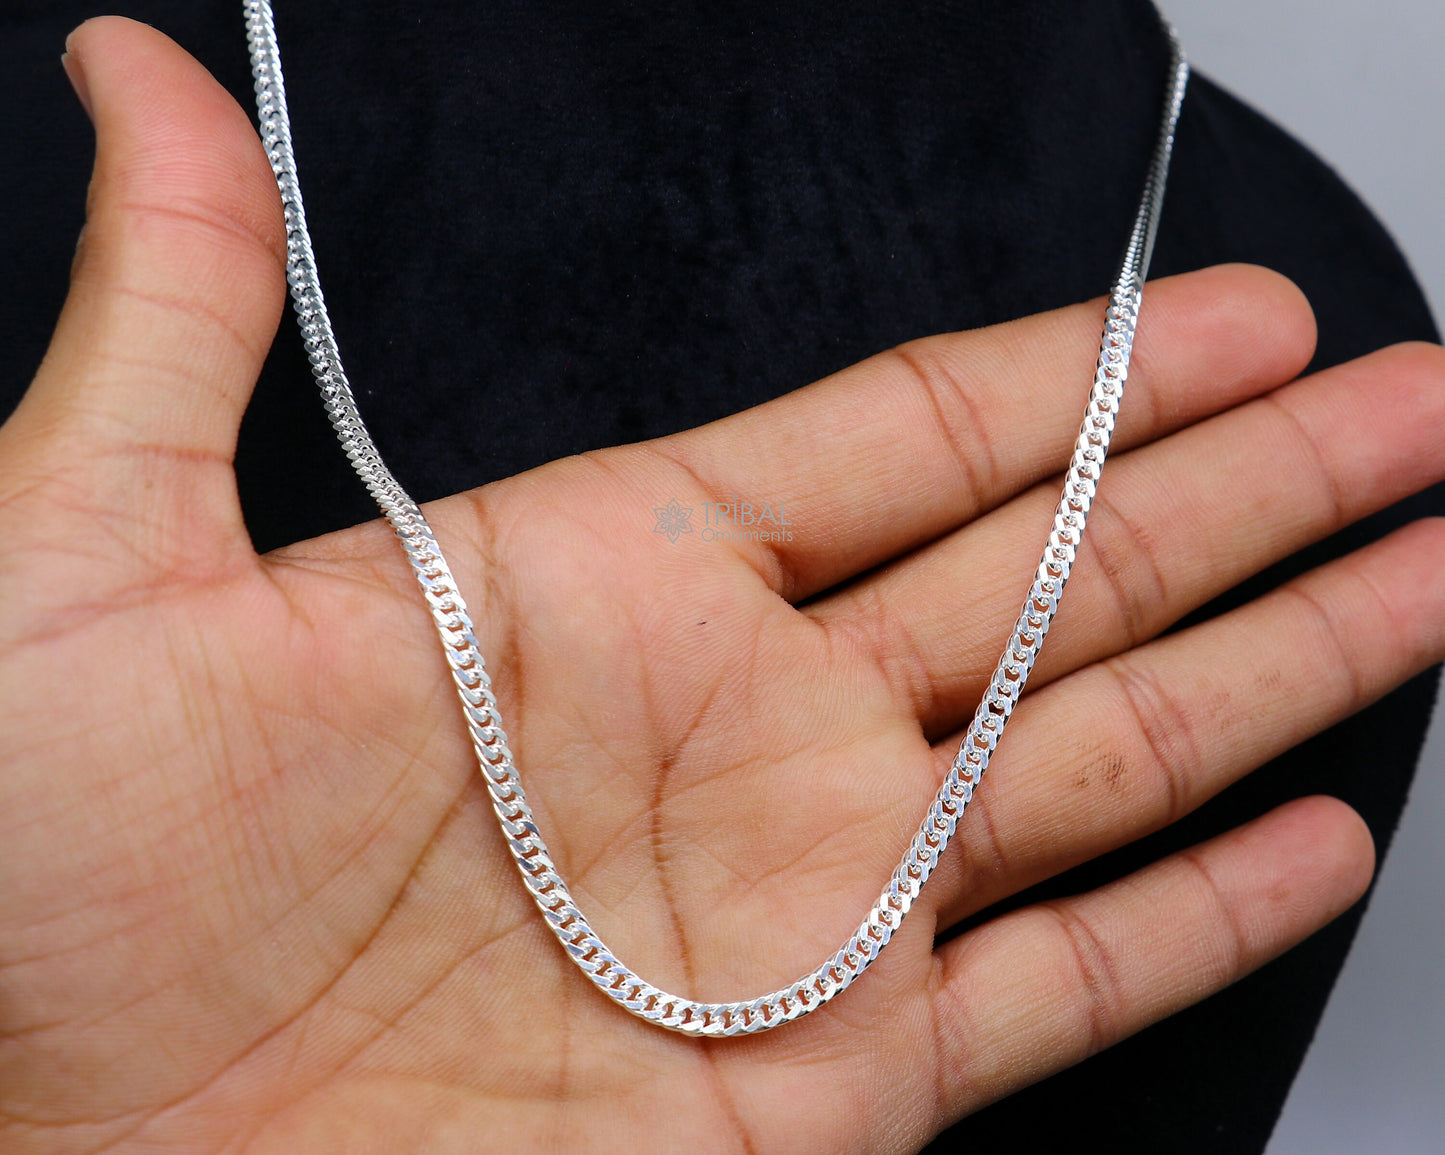 3mm 20"/24" solid 925 sterling silver handmade modern trendy design unique chain necklace giving it a distinctive and stylish look ch233 - TRIBAL ORNAMENTS